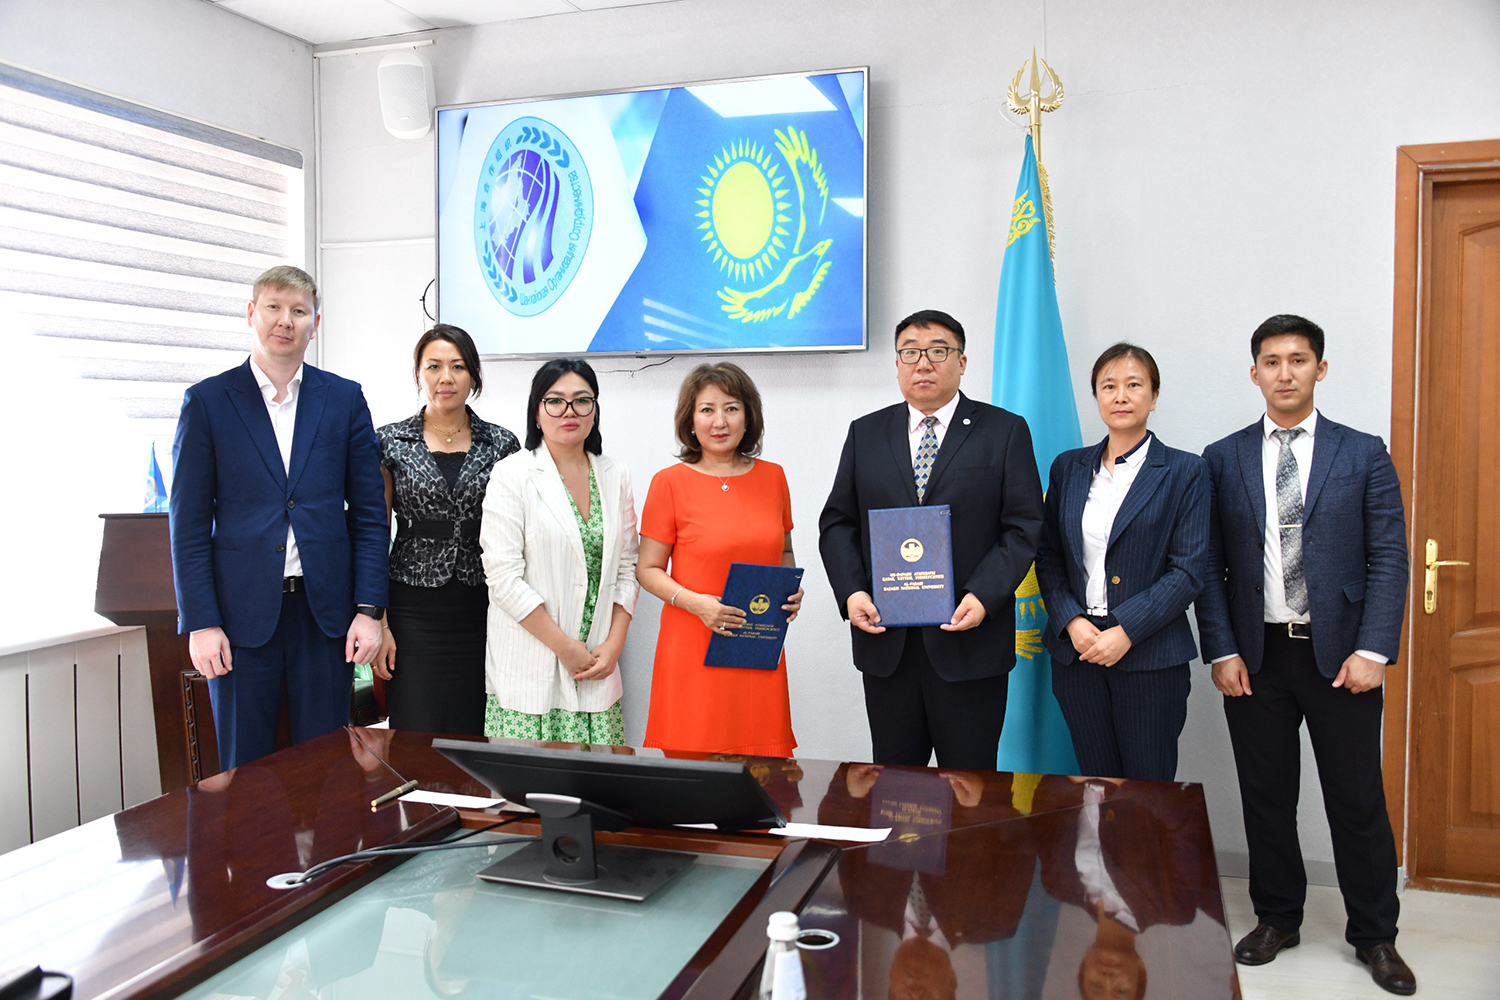 KazNU and the Chinese Technology Transfer Center are implementing joint projects